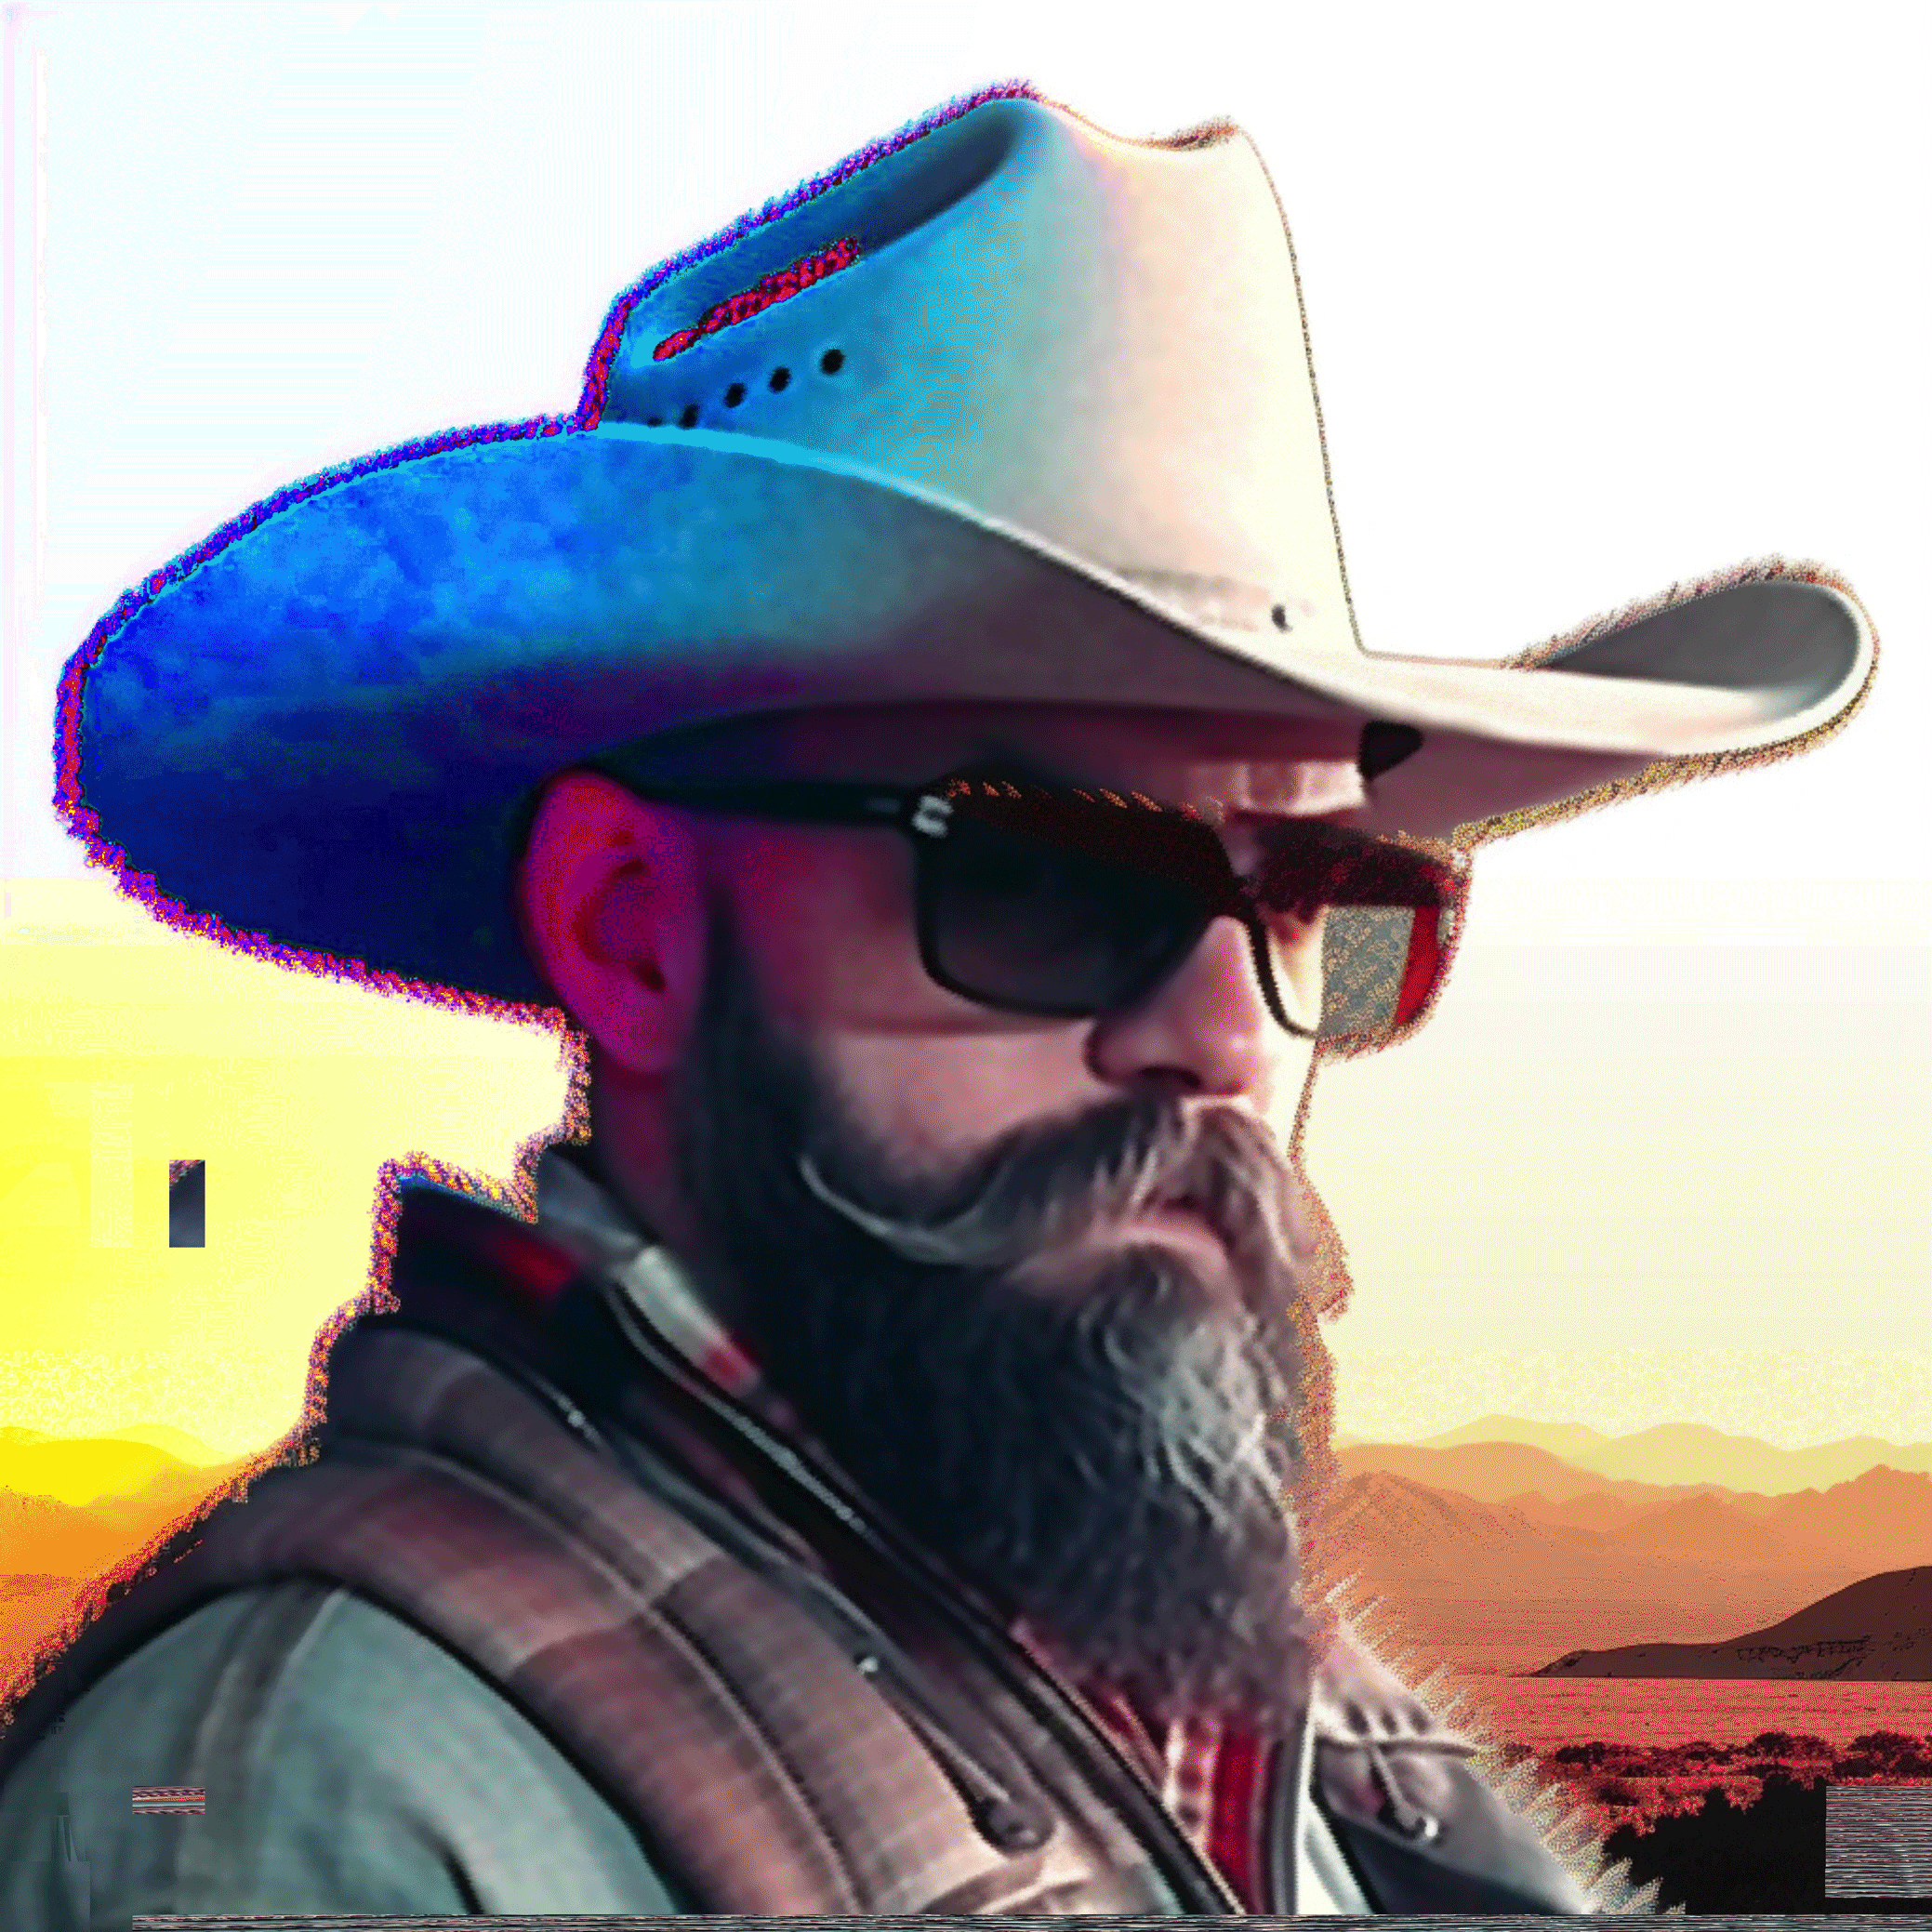 An image of a caucasian man with a beard and moustache, wearing a white cowboy hat and dark square sunglasses. The background is of pixelated deset landscape in shades of yellow and orange. The image appears as if something from a video game.